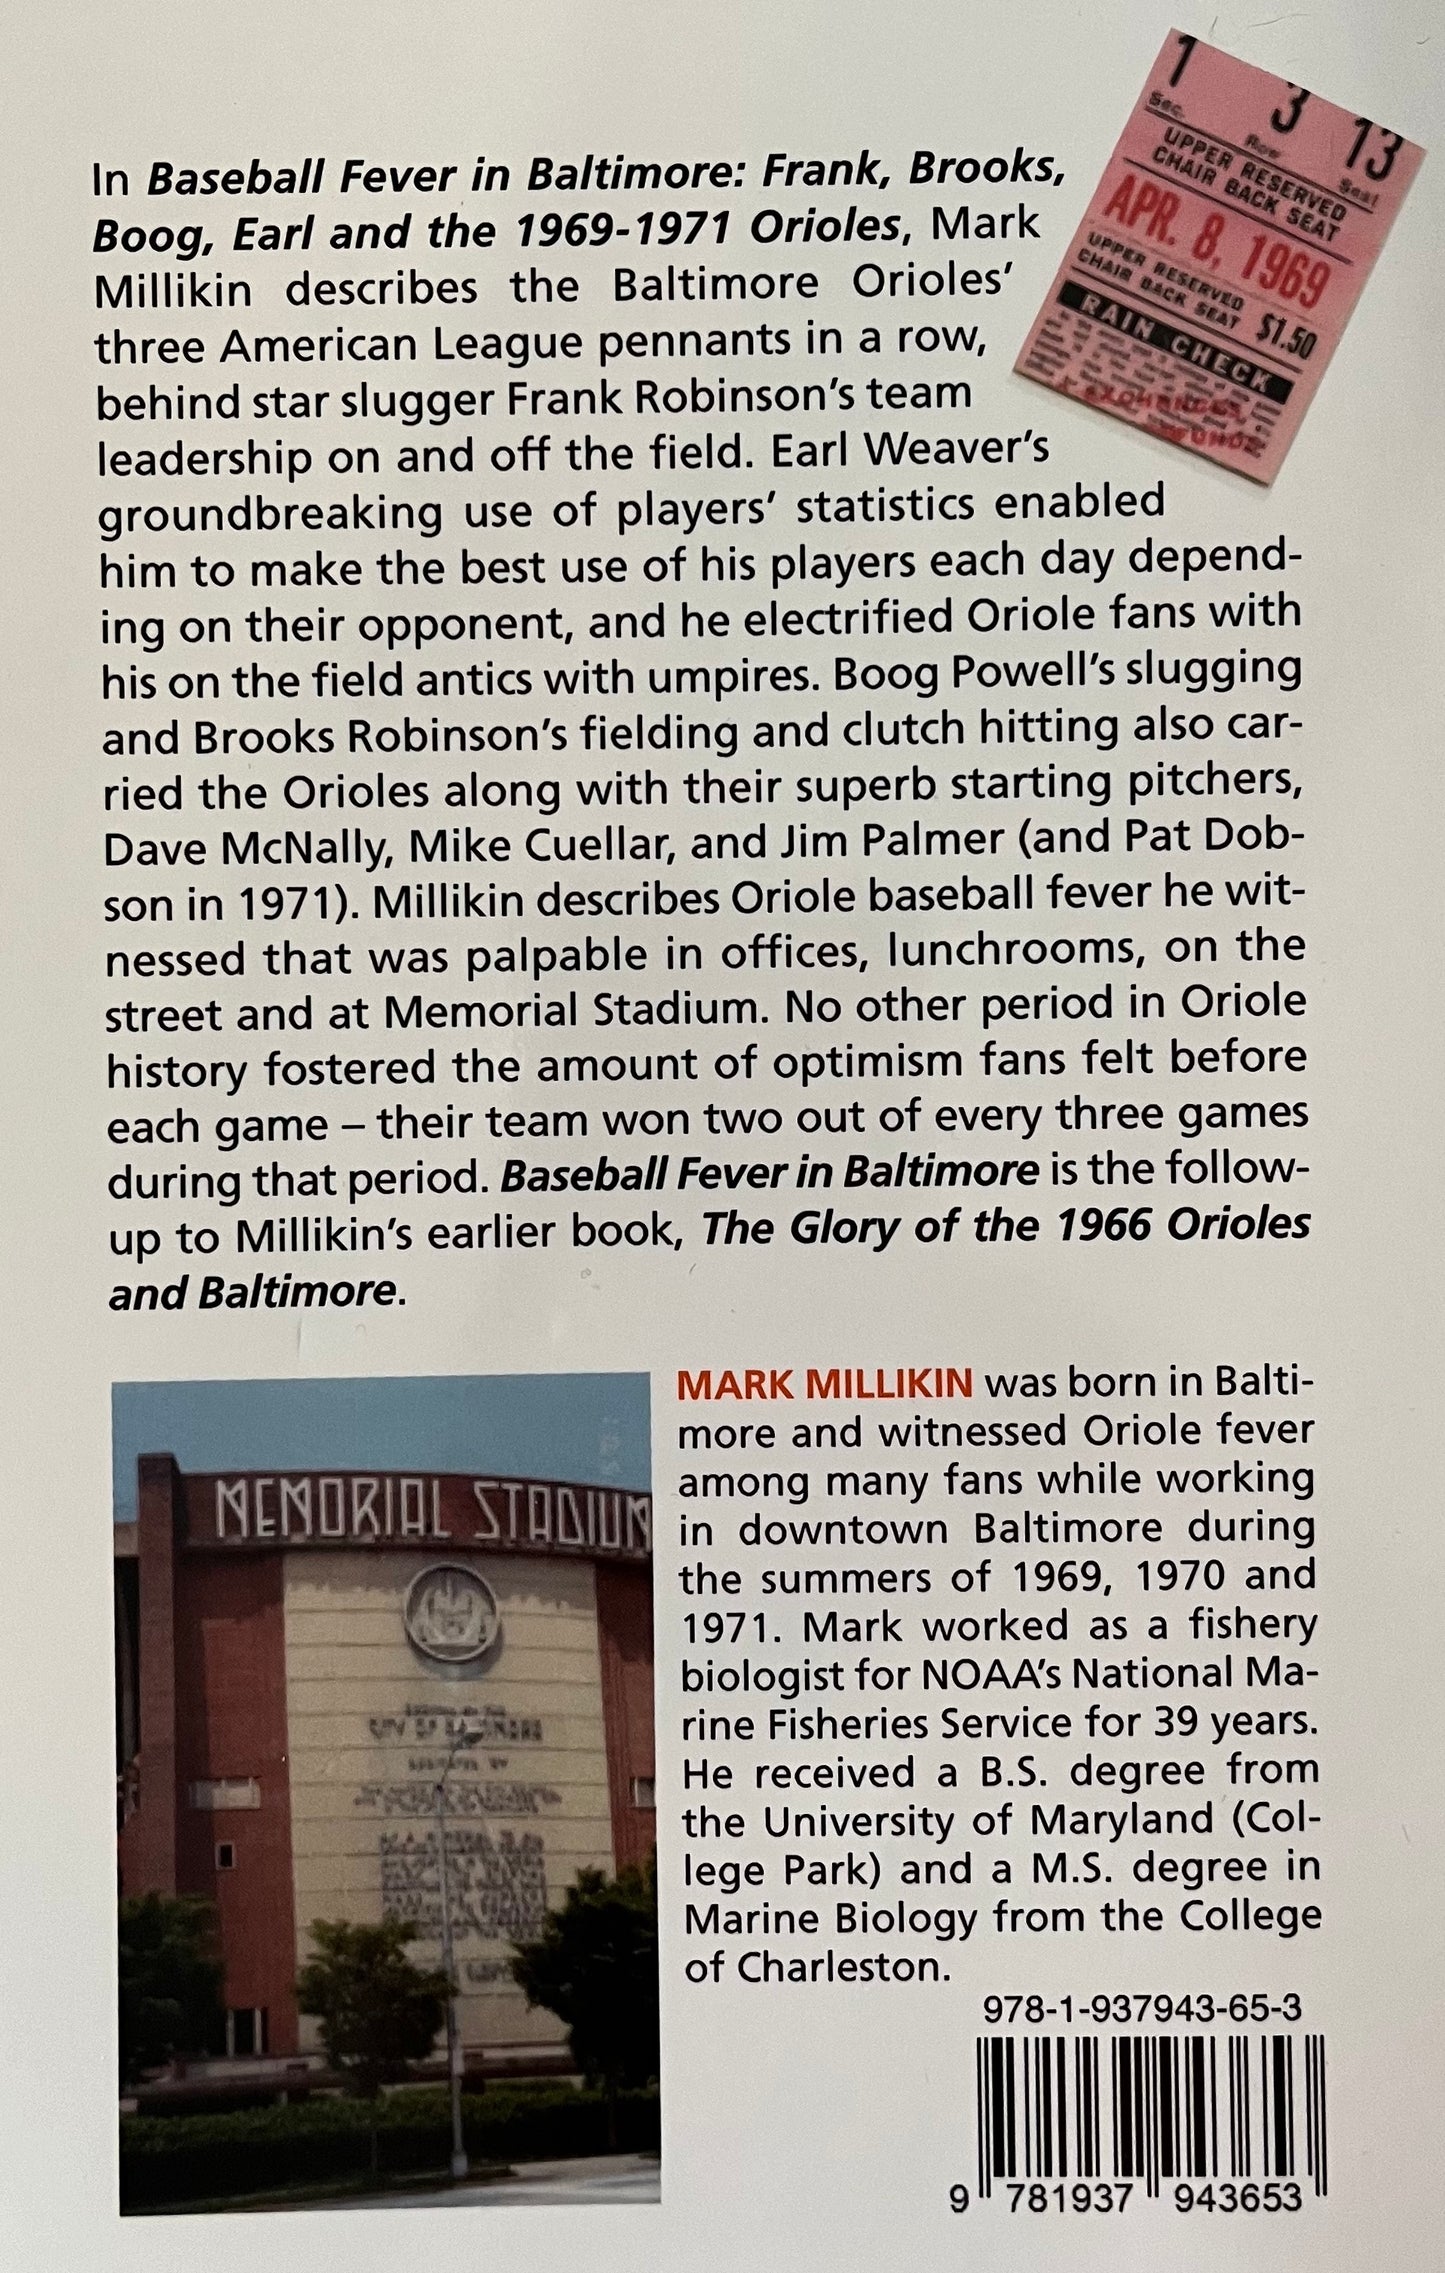 Baseball Fever in Baltimore: Frank, Brooks, Boog, Earl and the 1969-1971 Orioles by Mark R. Millikin